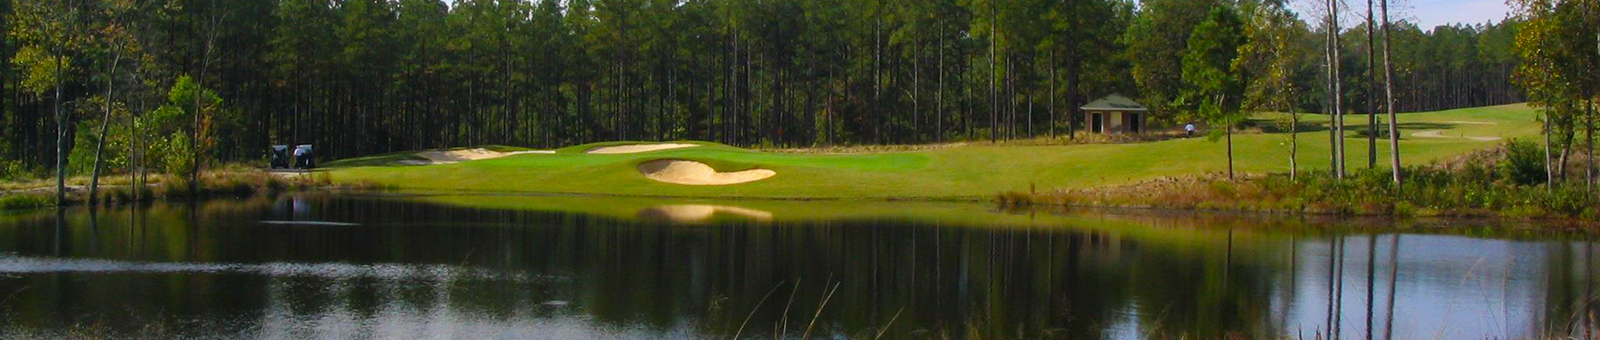 Course greens by the lake 